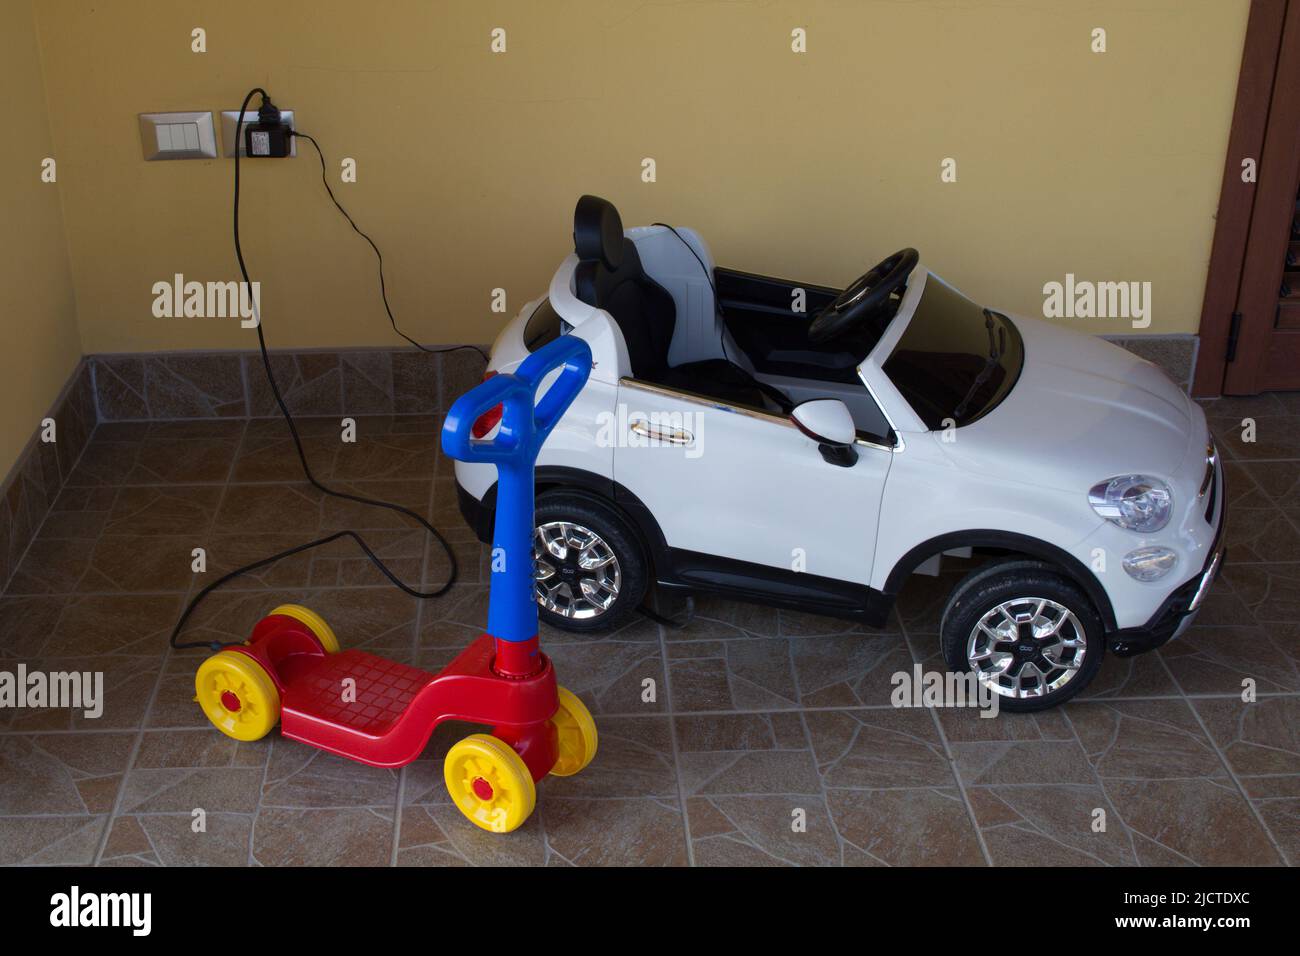 Nice picture of an electric car and a toy scooter while they are charging electrically. Stock Photo